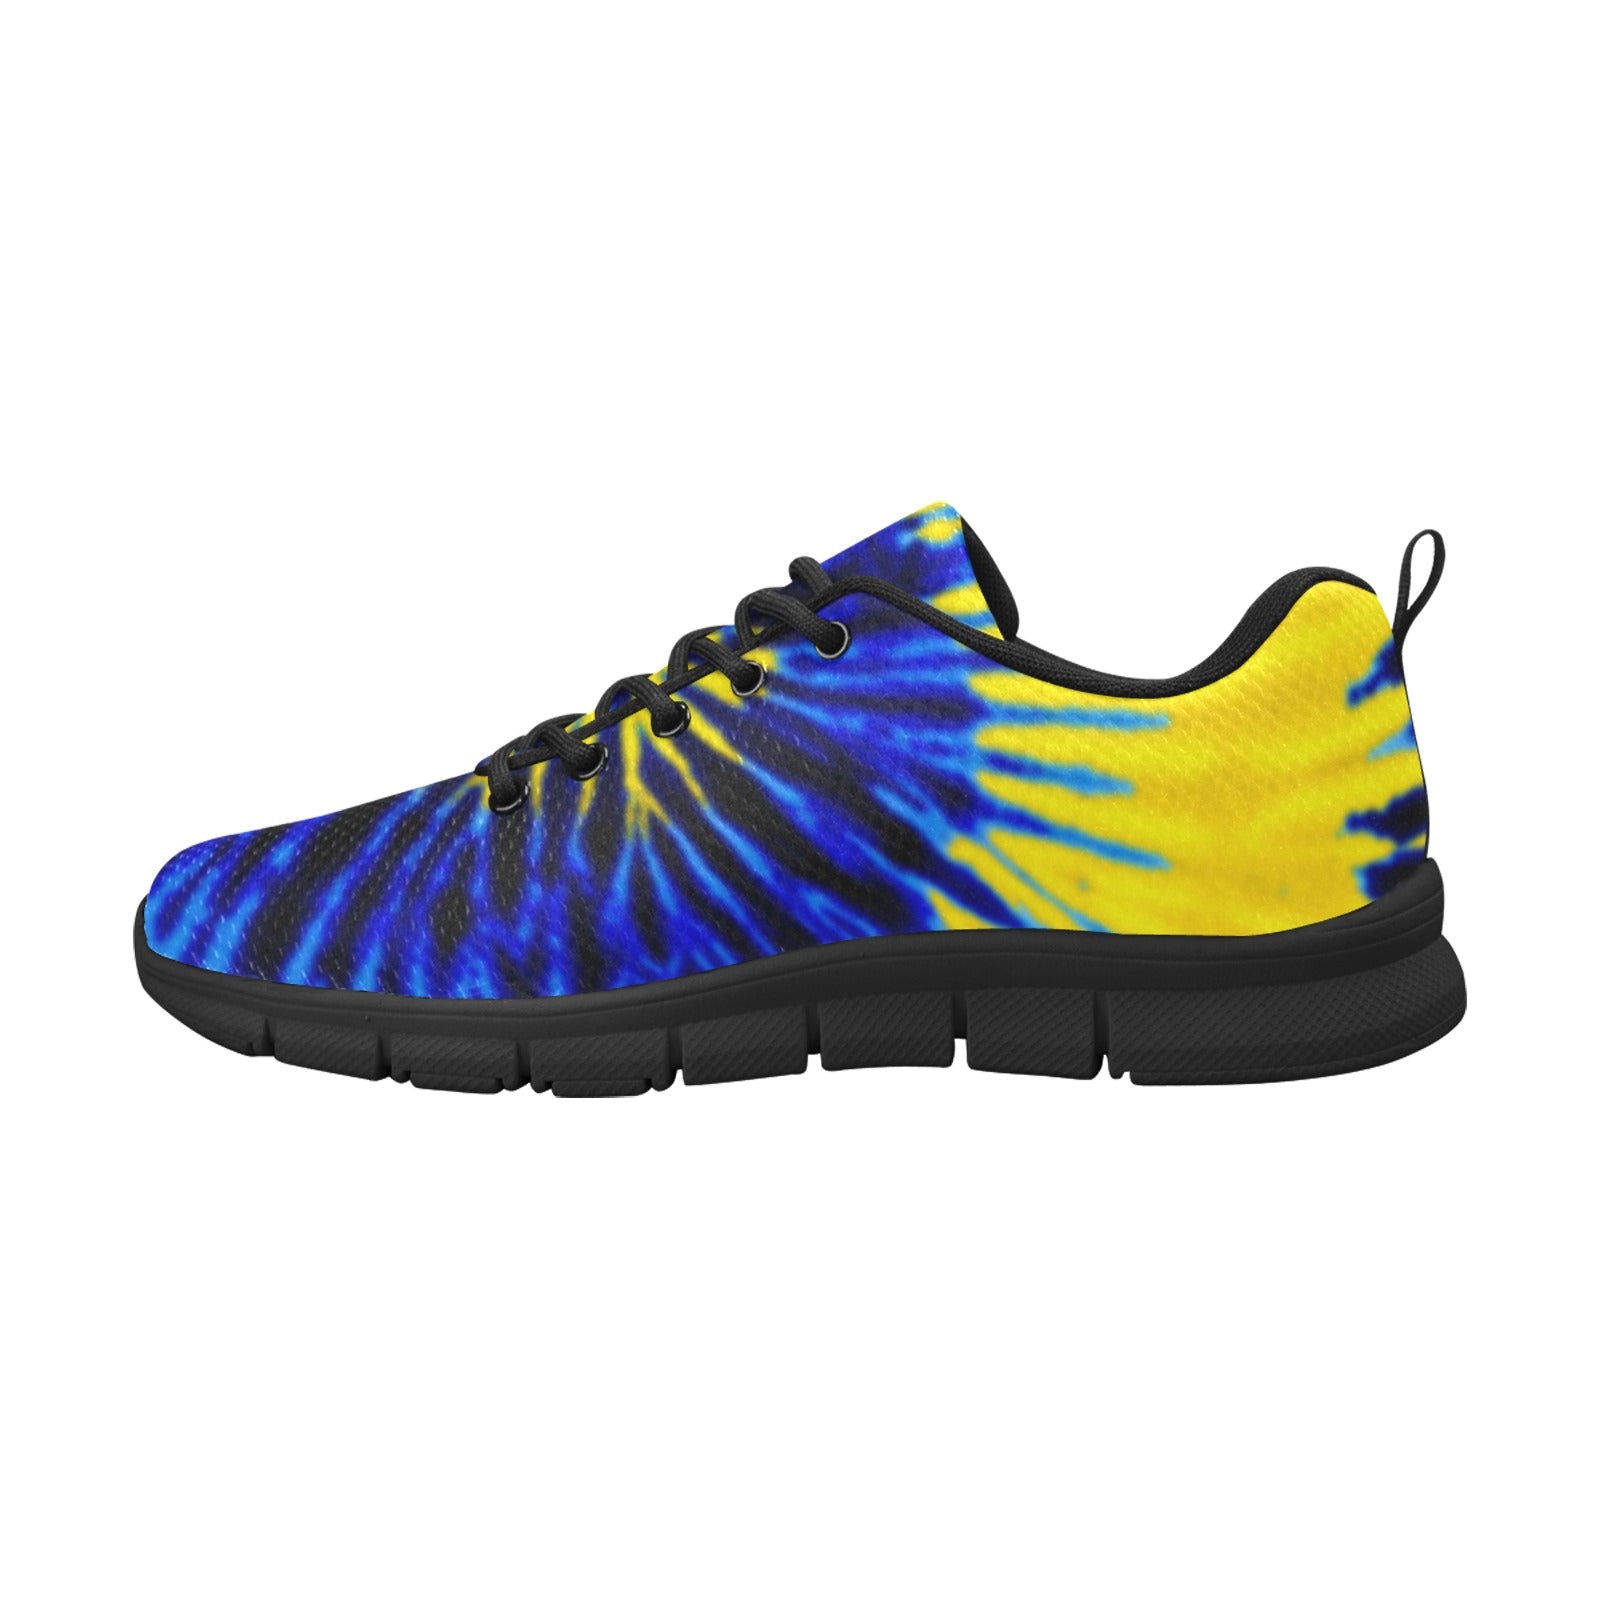 Royal Blue and Yellow Tie Dye Swirl Women's Breathable Sneakers